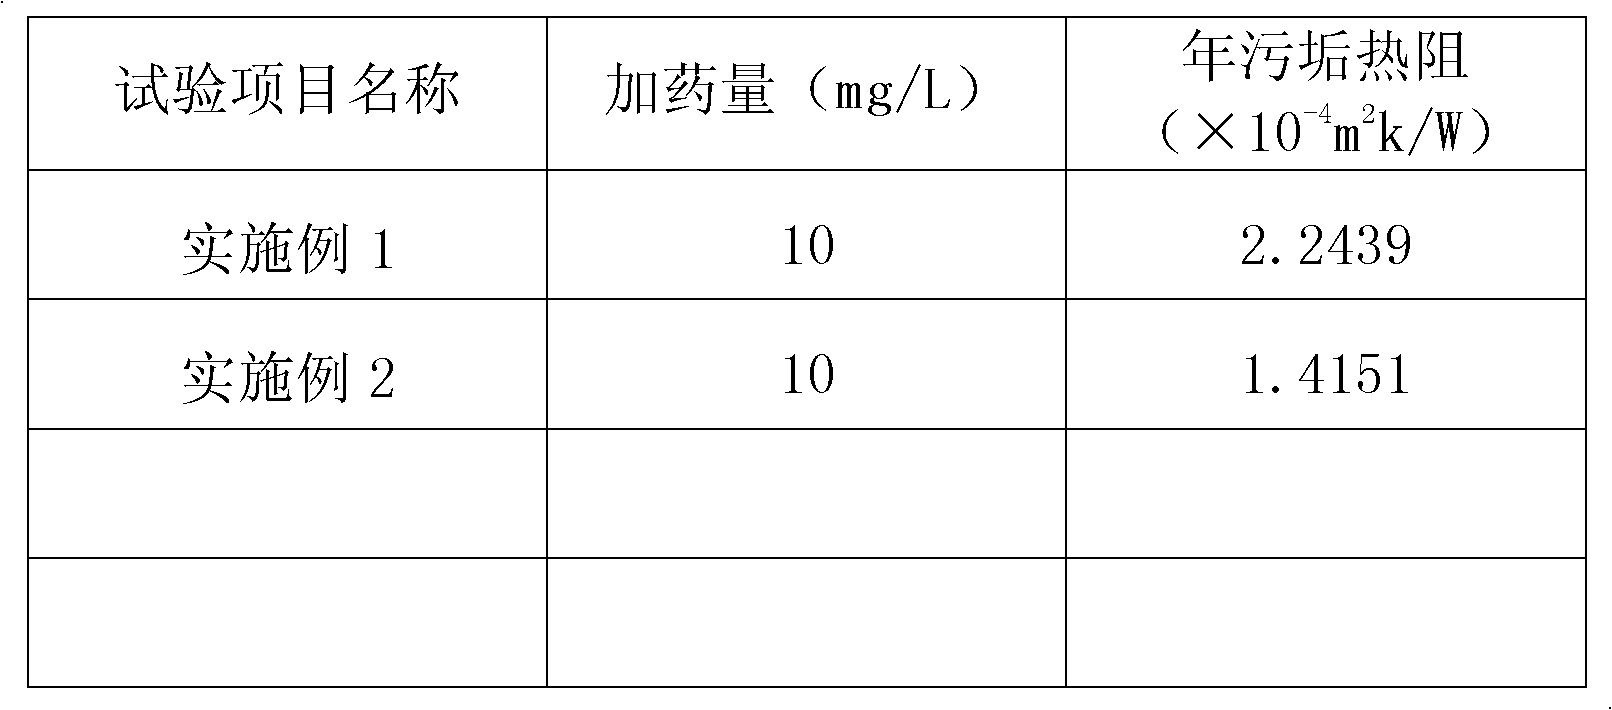 Phosphorus-free composite corrosion and scale inhibitor containing natural biodegradable substances